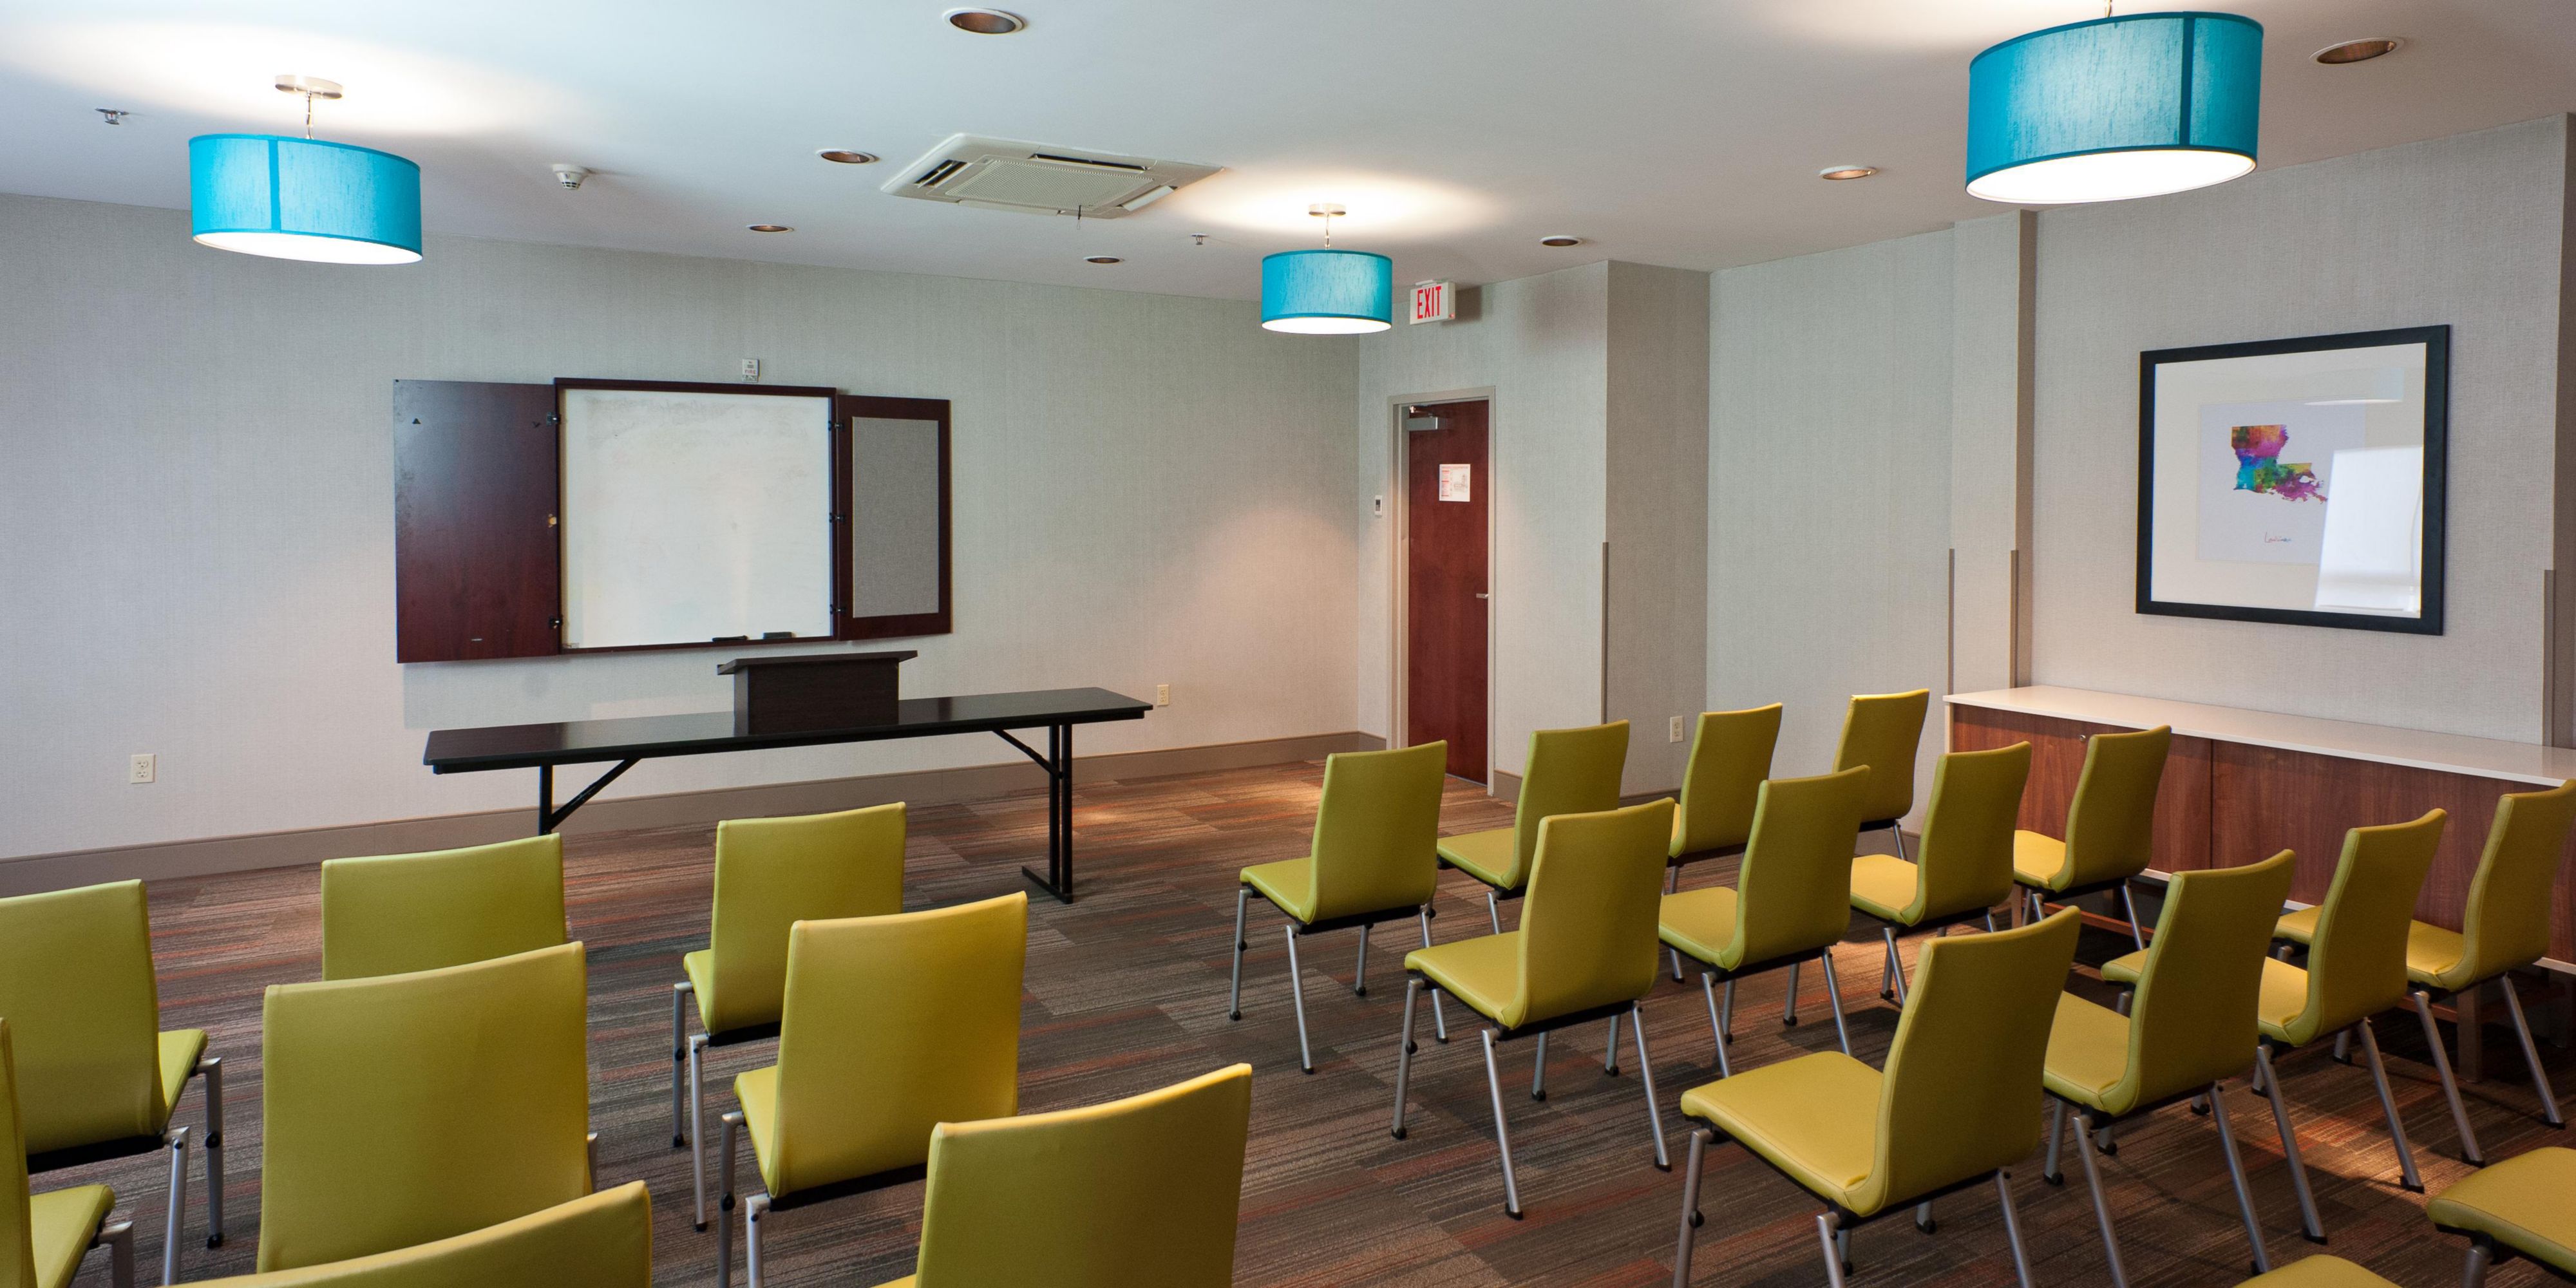 Have a ‘”ball” in our 1,400 square foot meeting room. We offer free high-speed internet and can accommodate up to 50 attendees. Several local businesses can provide on site catering and delivery for lunch or dinner.